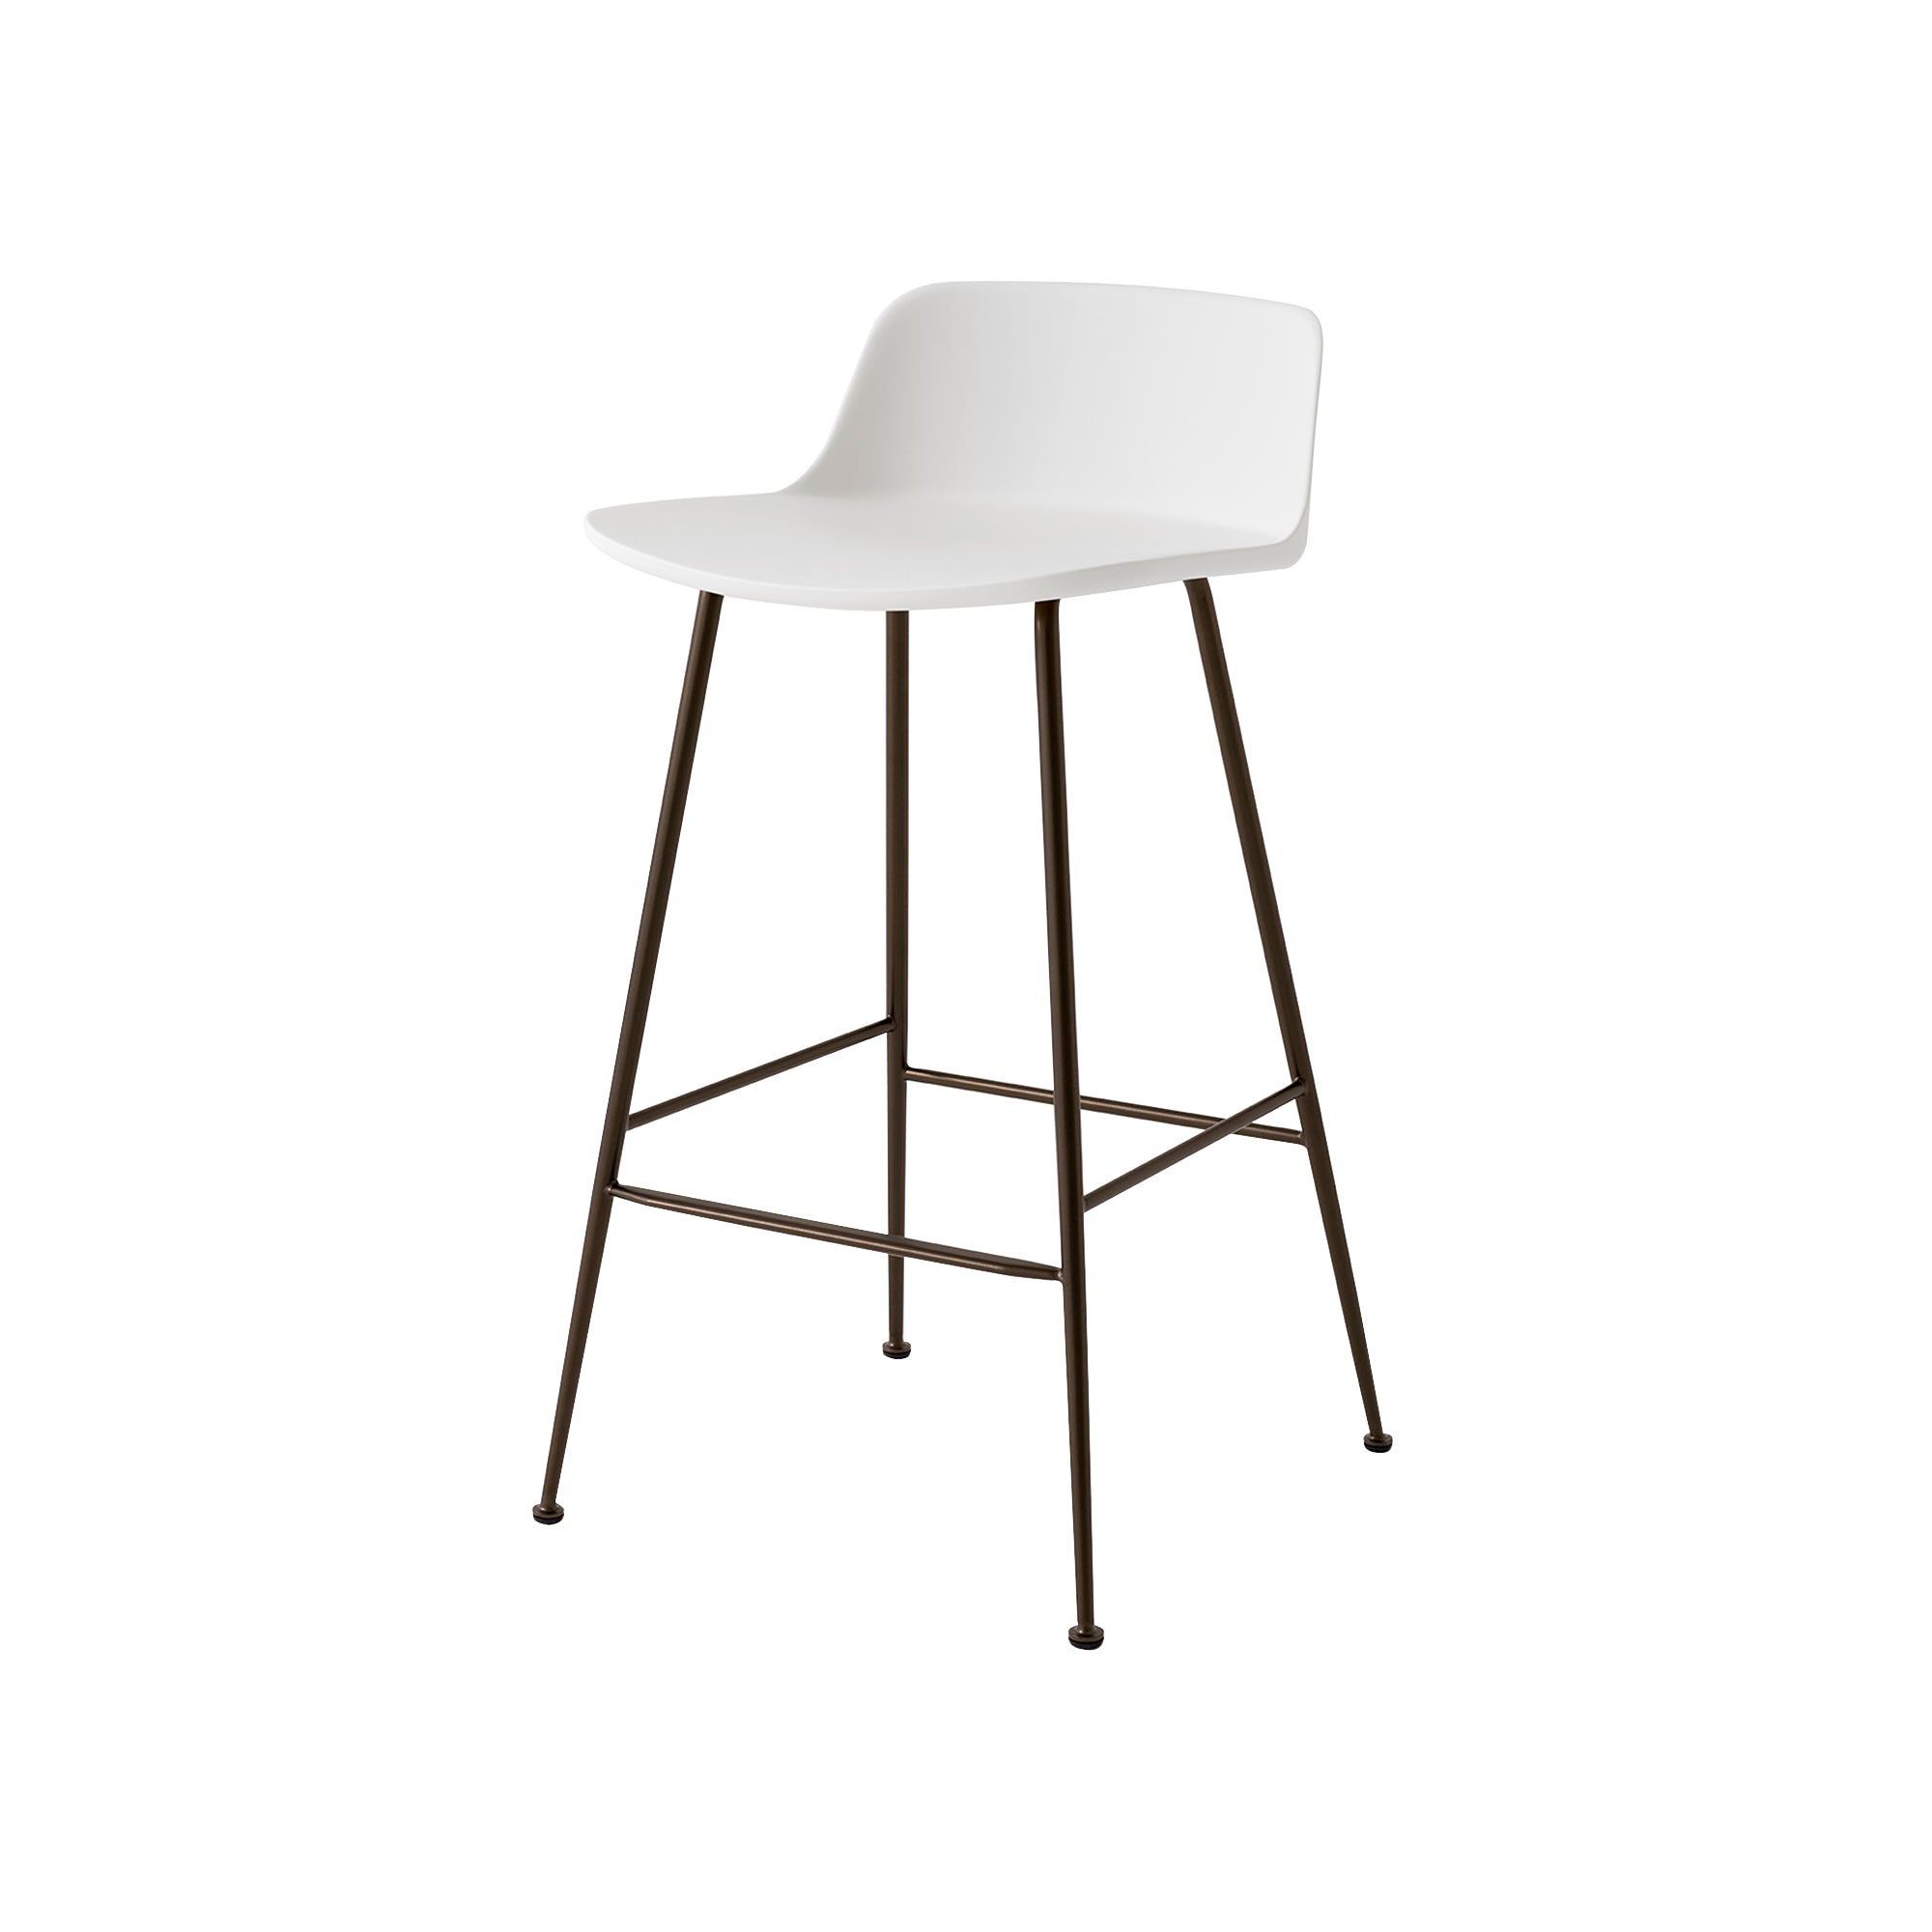 Rely Bar + Counter Lowback Stool: HW81 + HW86 + Counter (HW81) + White + Bronzed